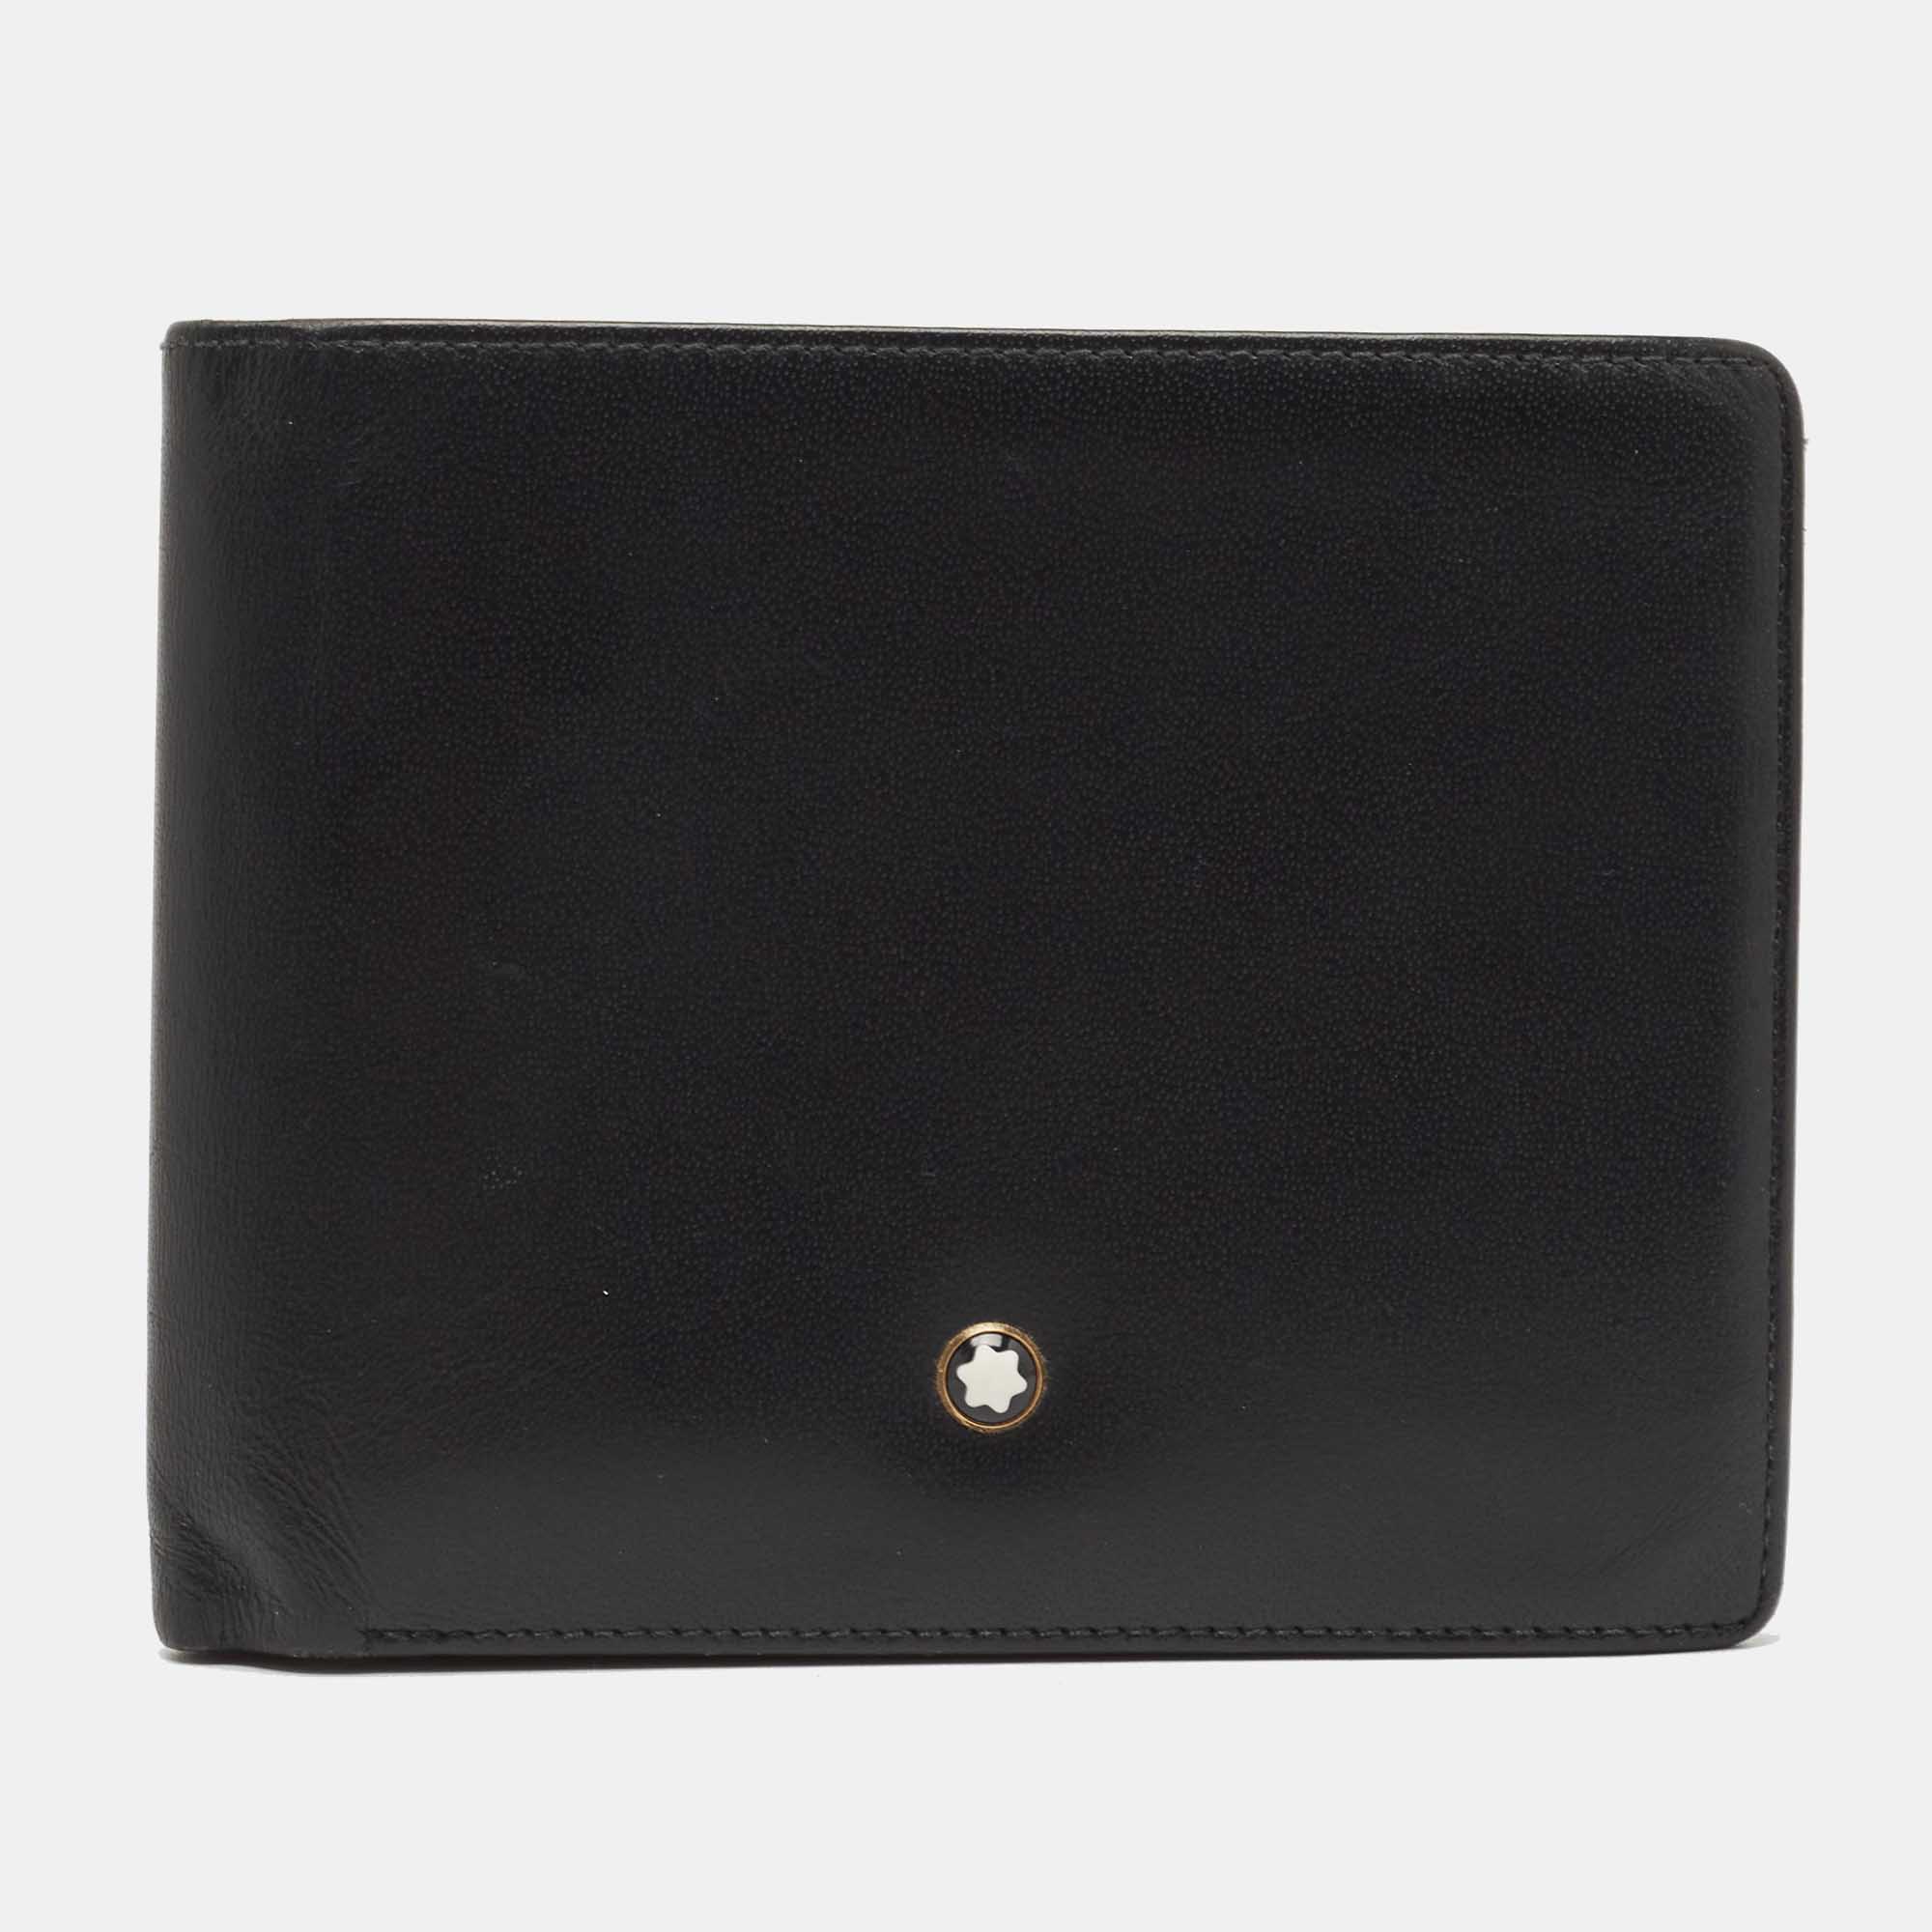 Pre-owned Montblanc Black Leather Miesterstuck Bifold Wallet